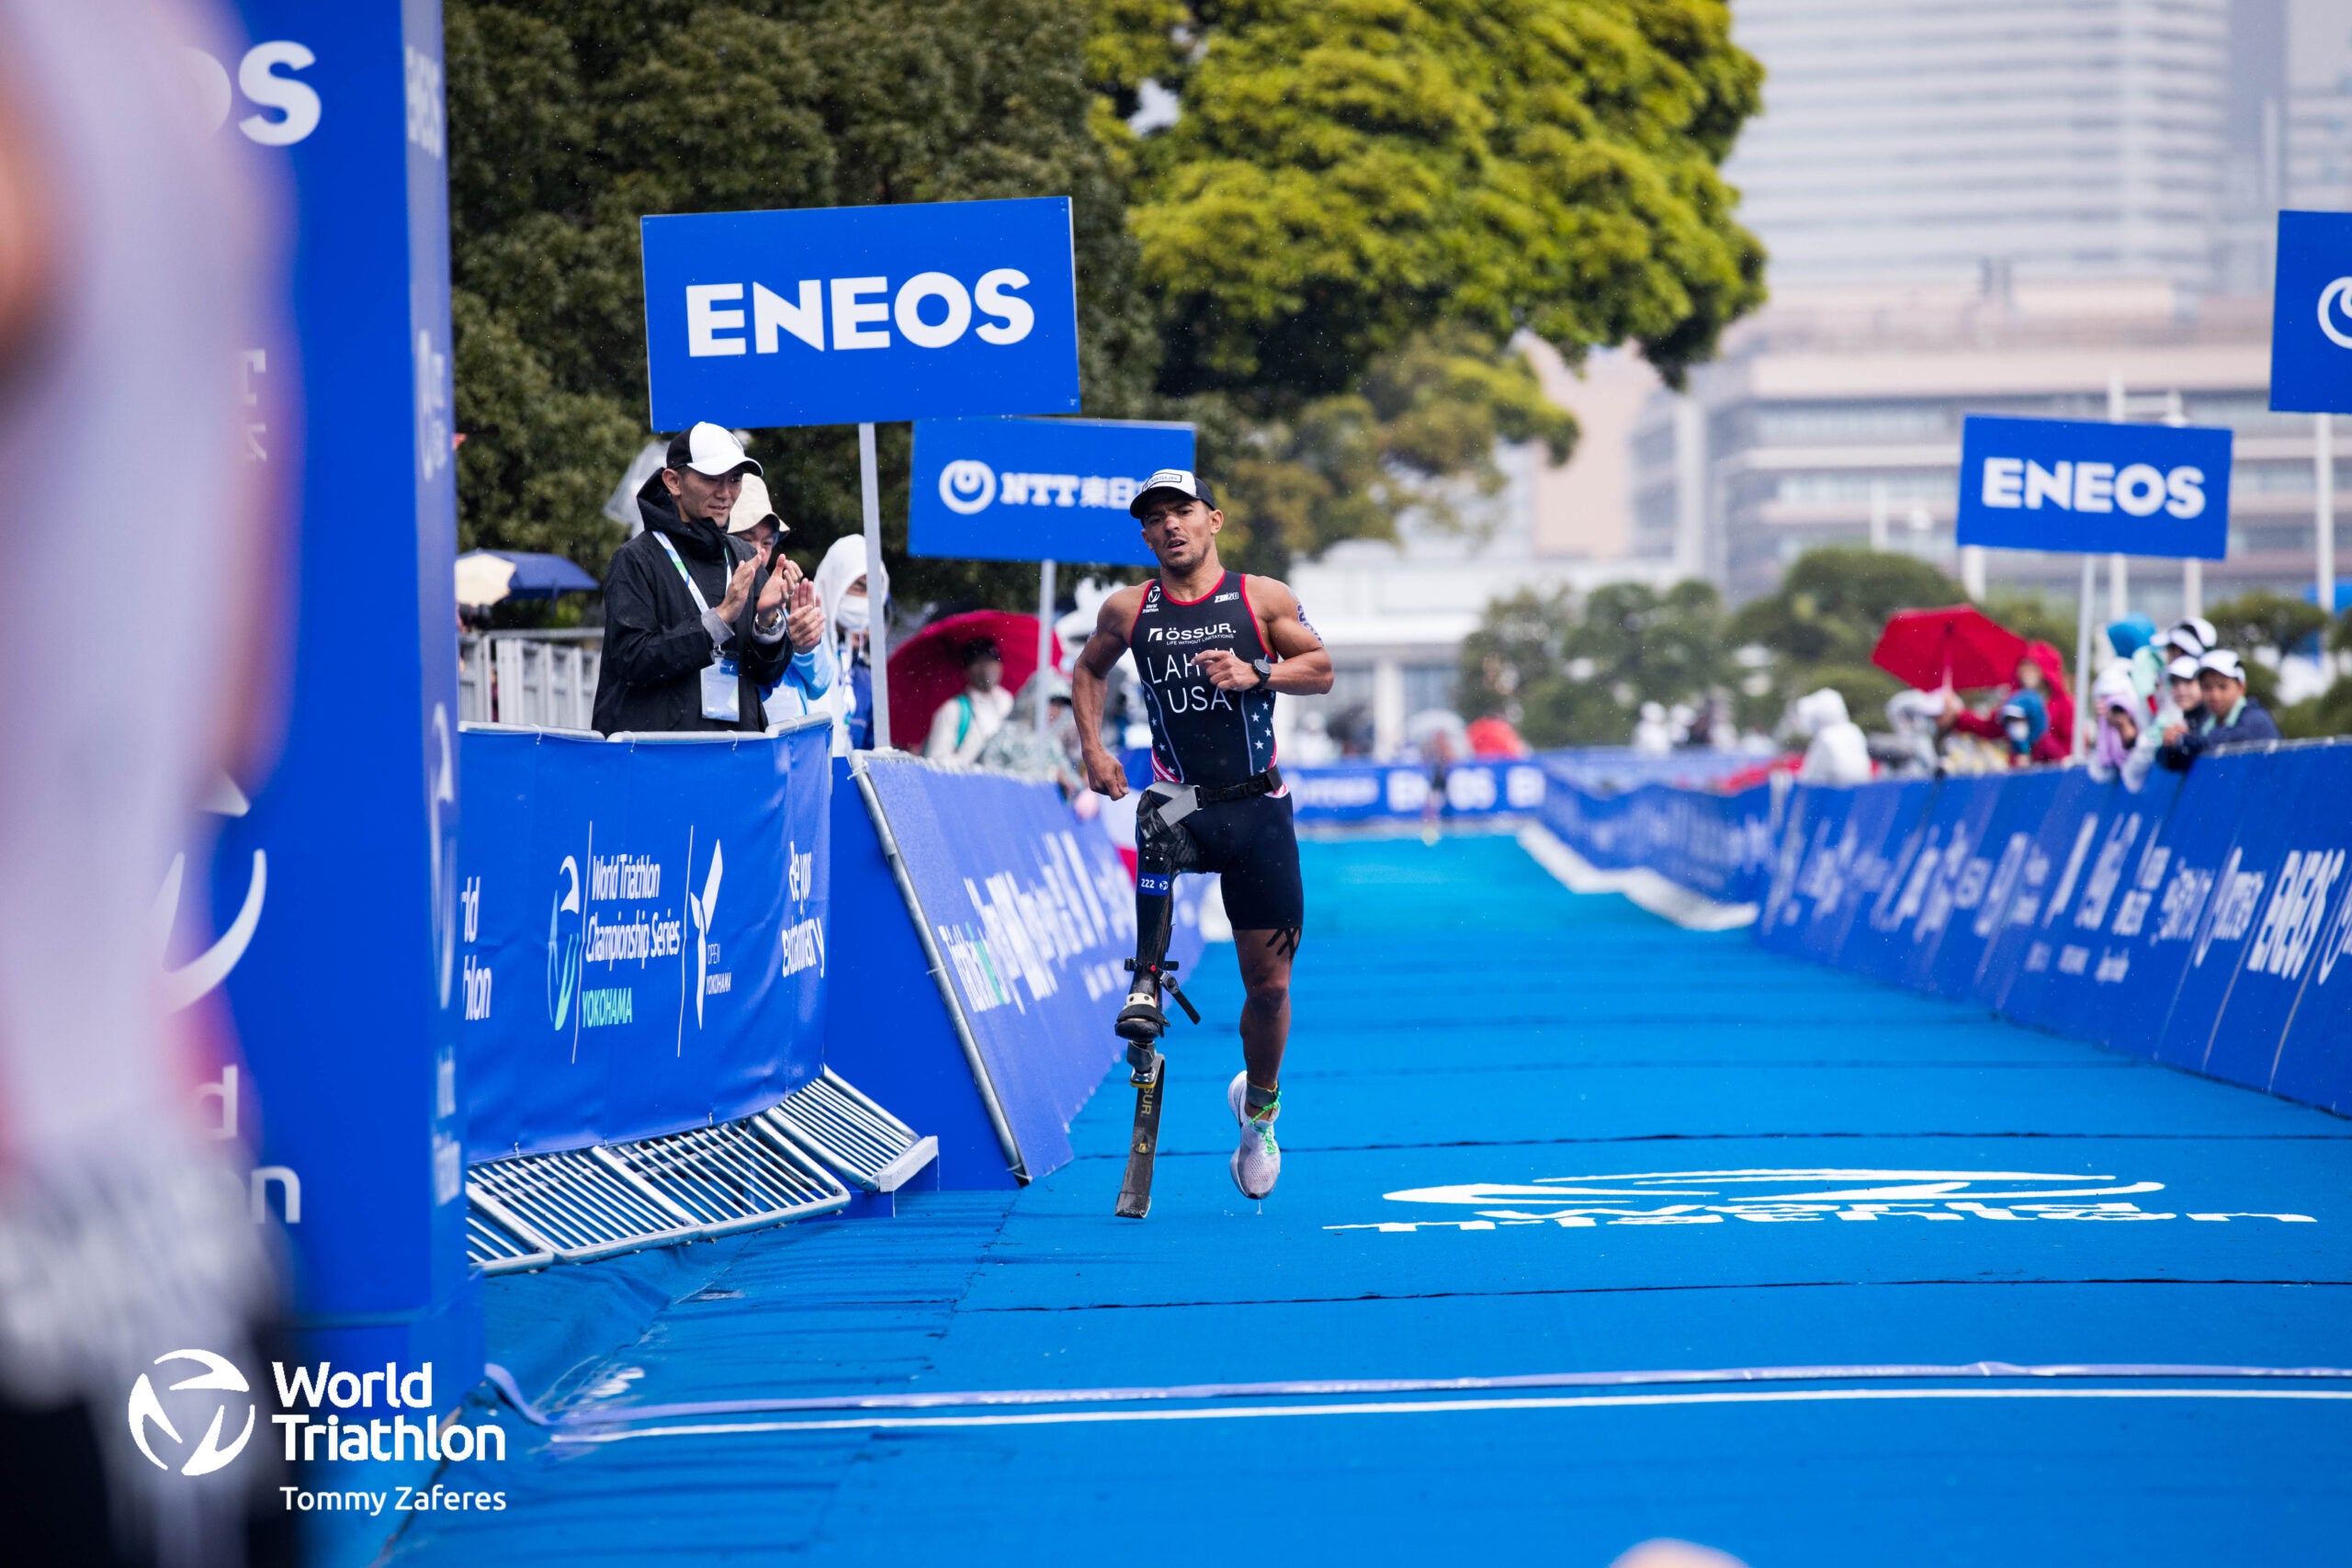 Mohamed Lahna has three World Triathlon Para Series podiums and a World Cup win already this year.